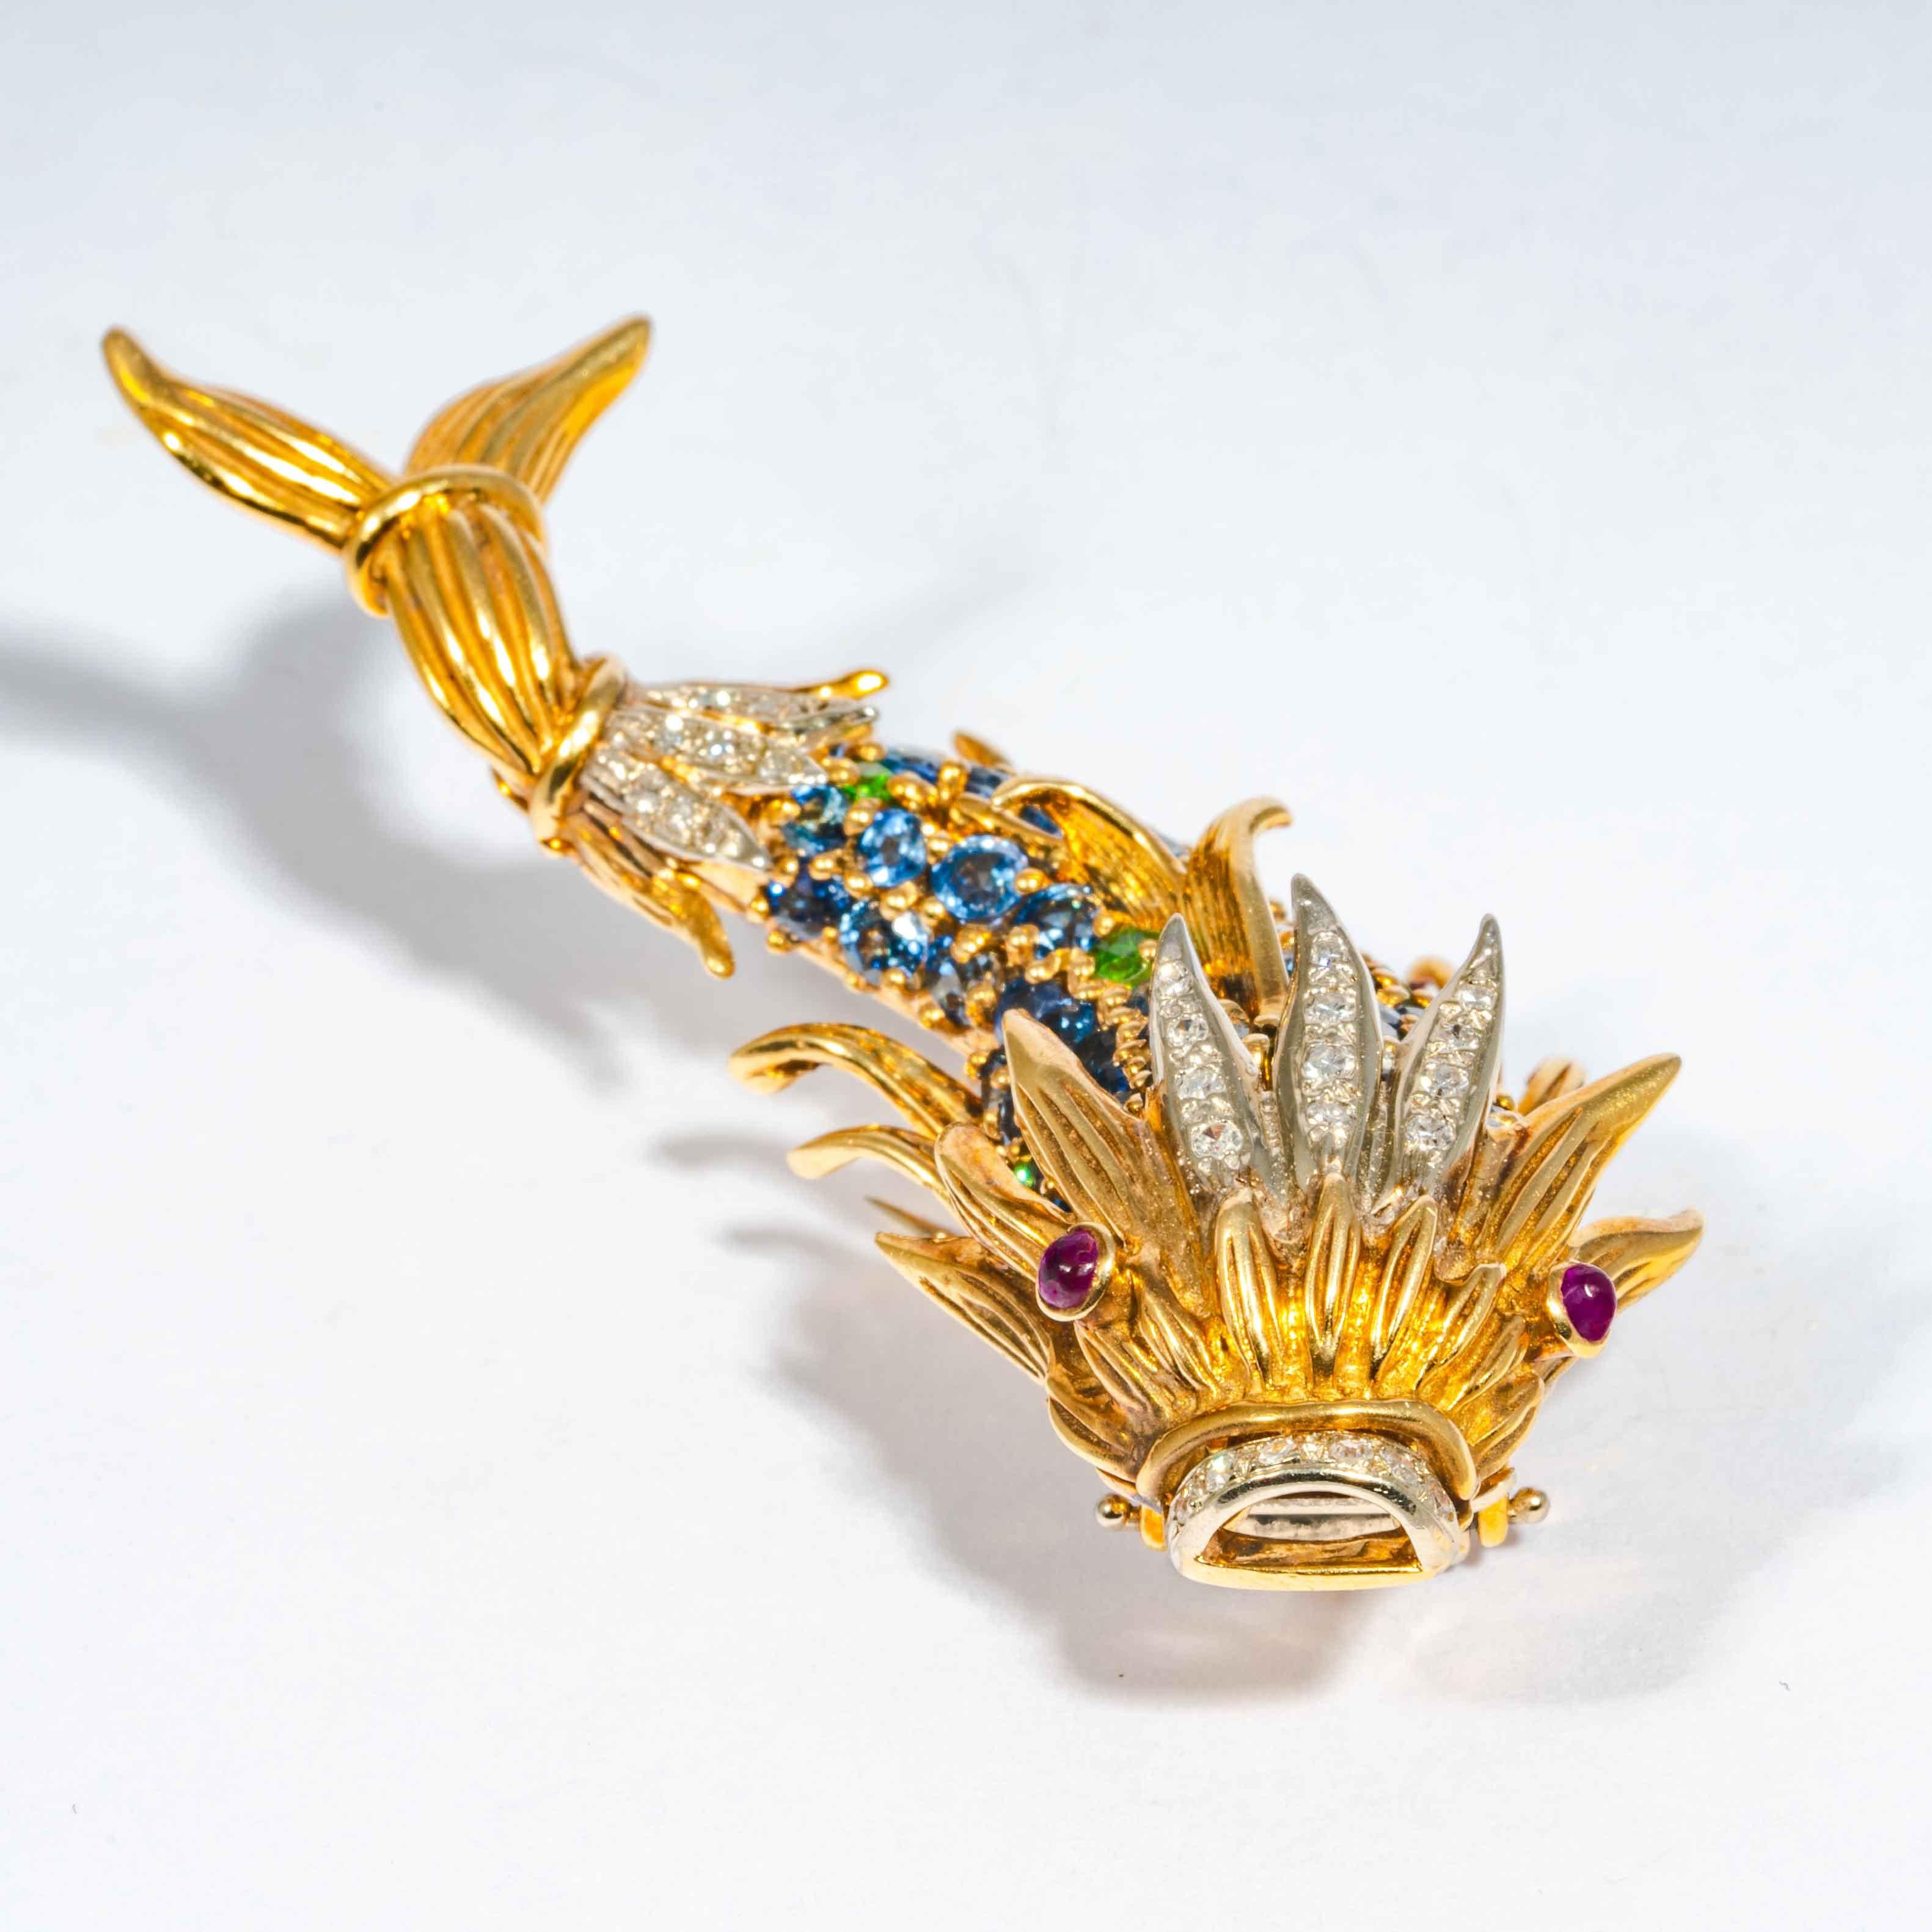 This mid-late 20th century pin is comprised of full cut blue Ceylon sapphires, and accenting gemset white diamonds fish 